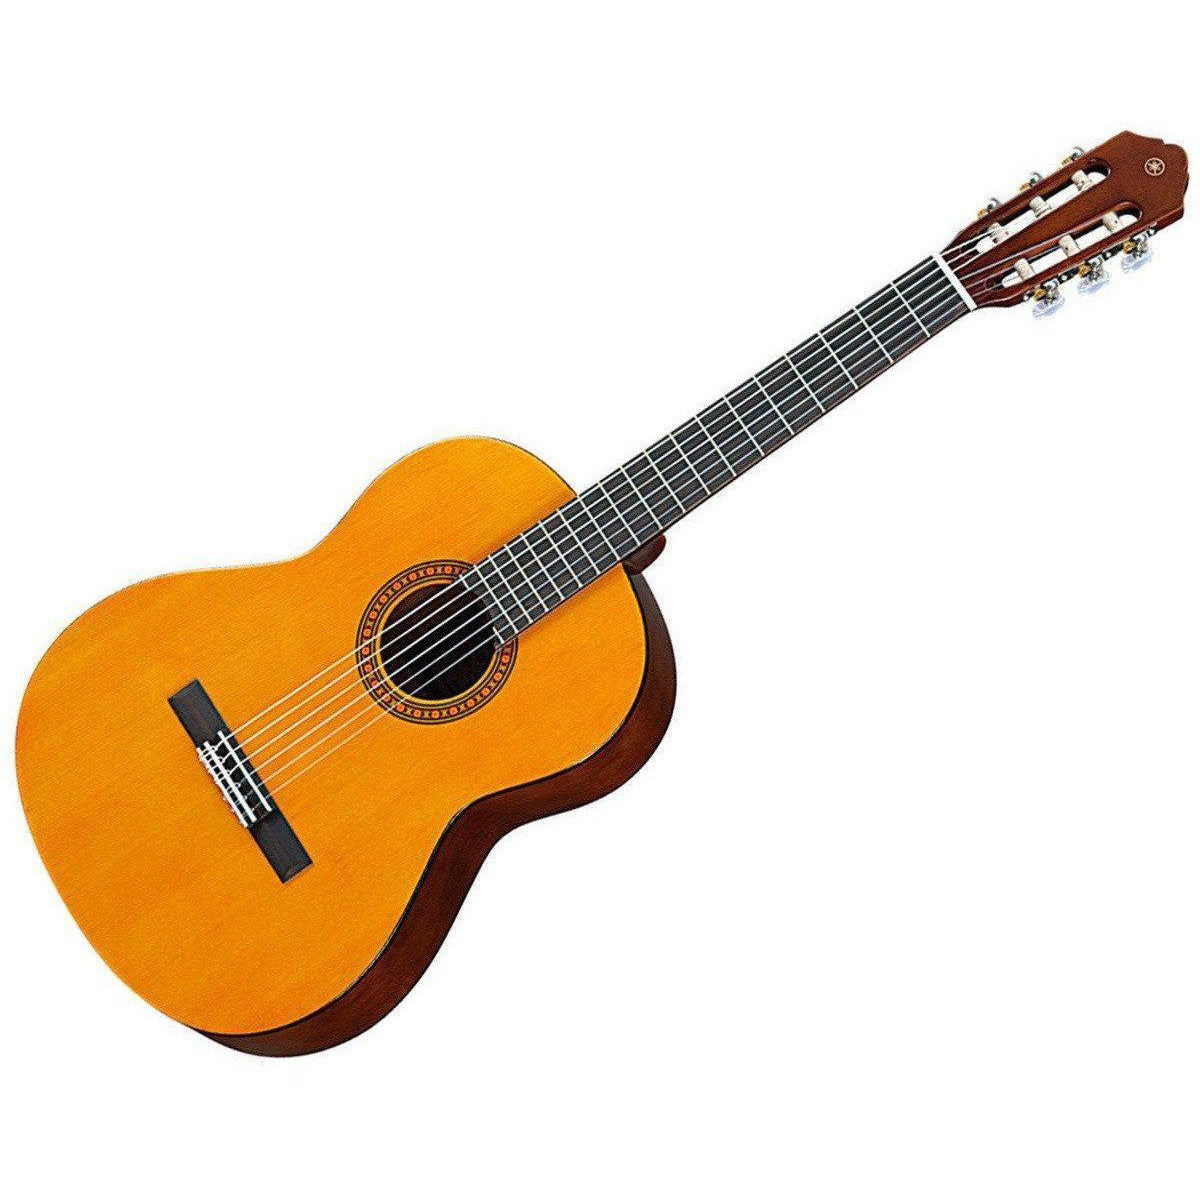 Trots Normaal Aap Yamaha CGS103AII 3/4 Size Kids Nylon Guitar for Young Beginners – Andy's  Music